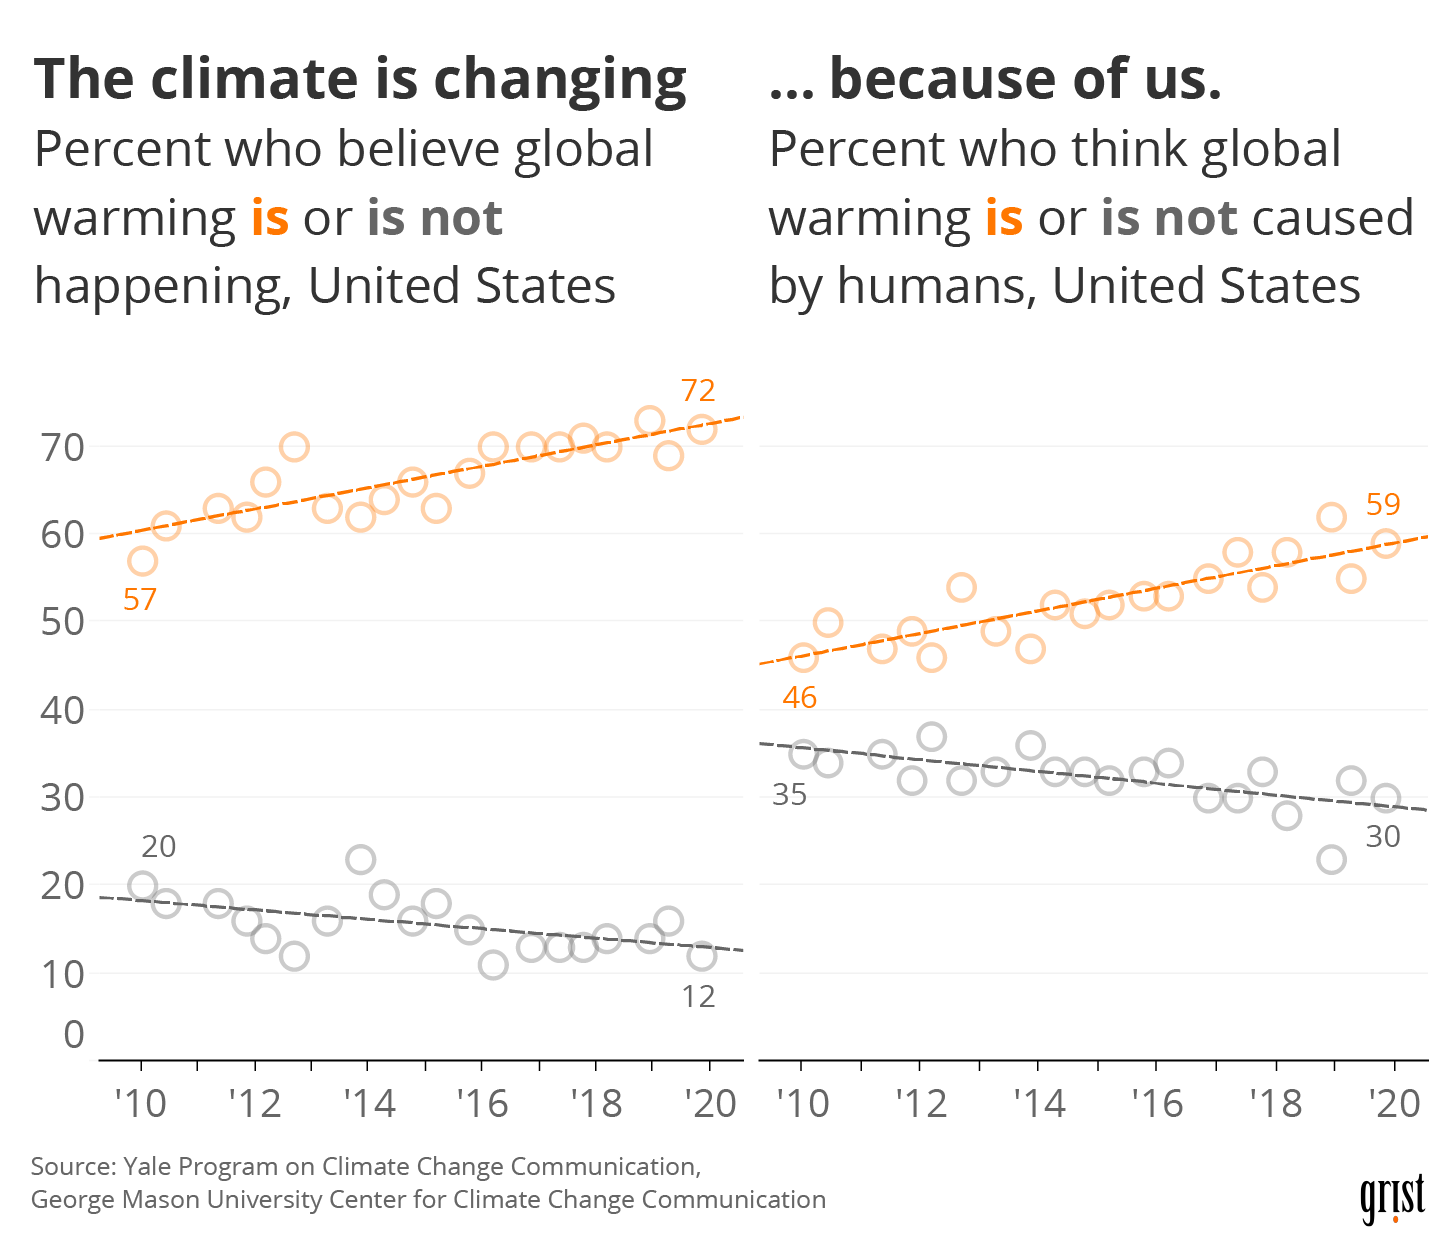 Two line charts showing an increasing percentage of people between 2010 and 2019 who believe climate change is happening and caused by humans